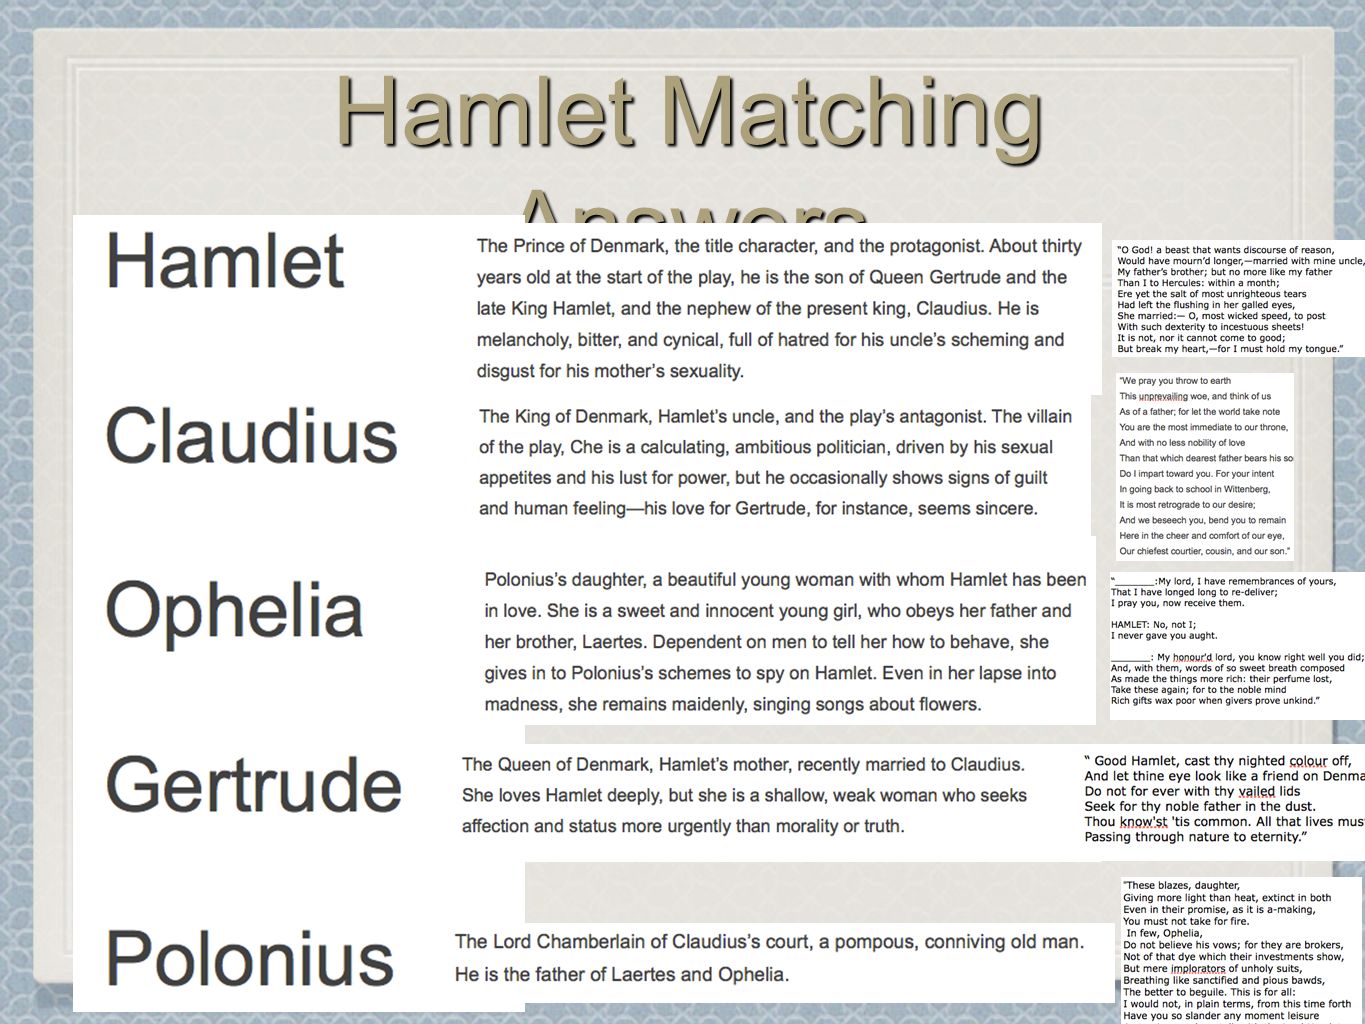 In Hamlet, what two or three words or phrases best describe Hamlet (the person)?